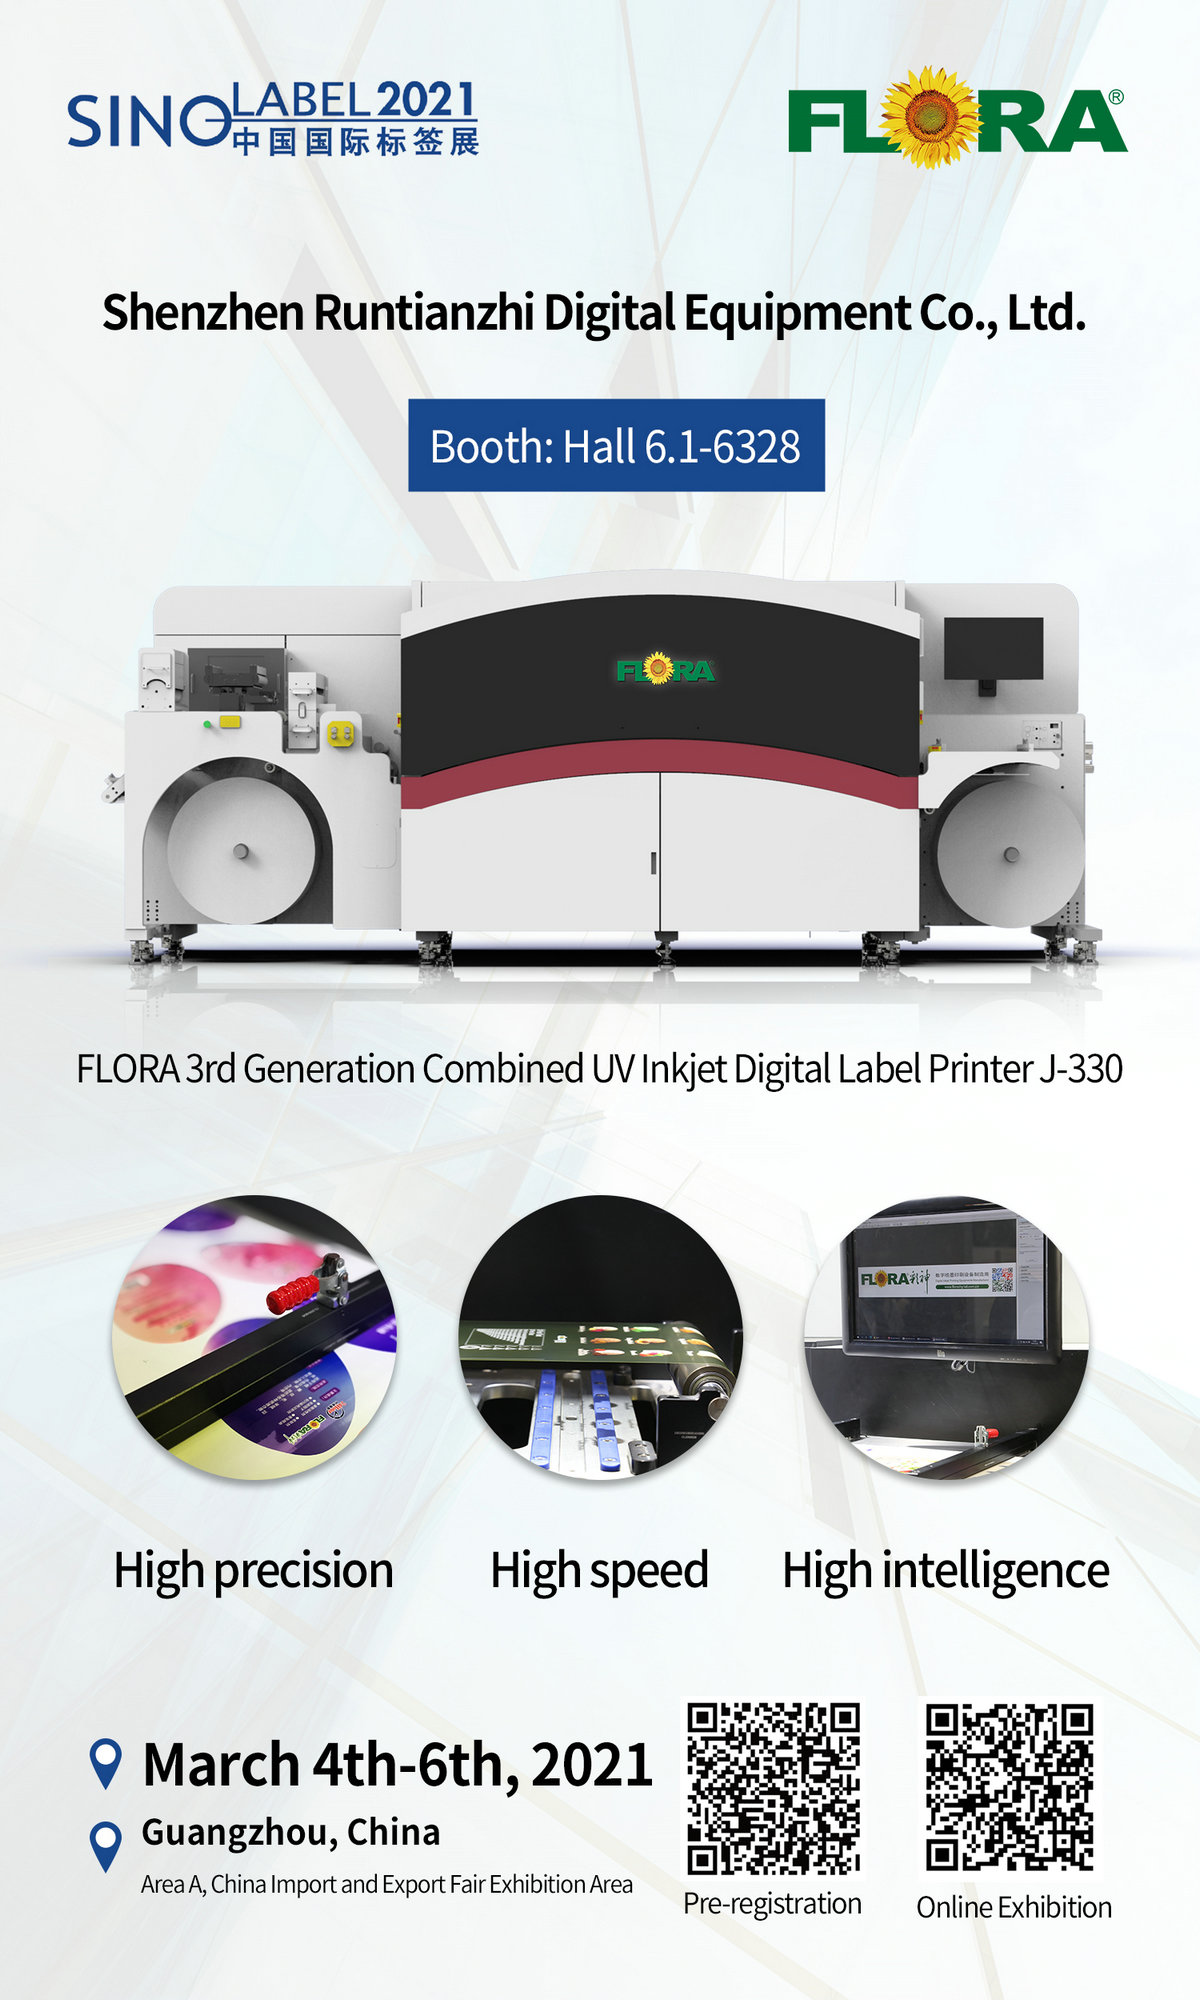 Runtianzhi looks forward to meeting you at China International Label Printing Exhibition 2021!